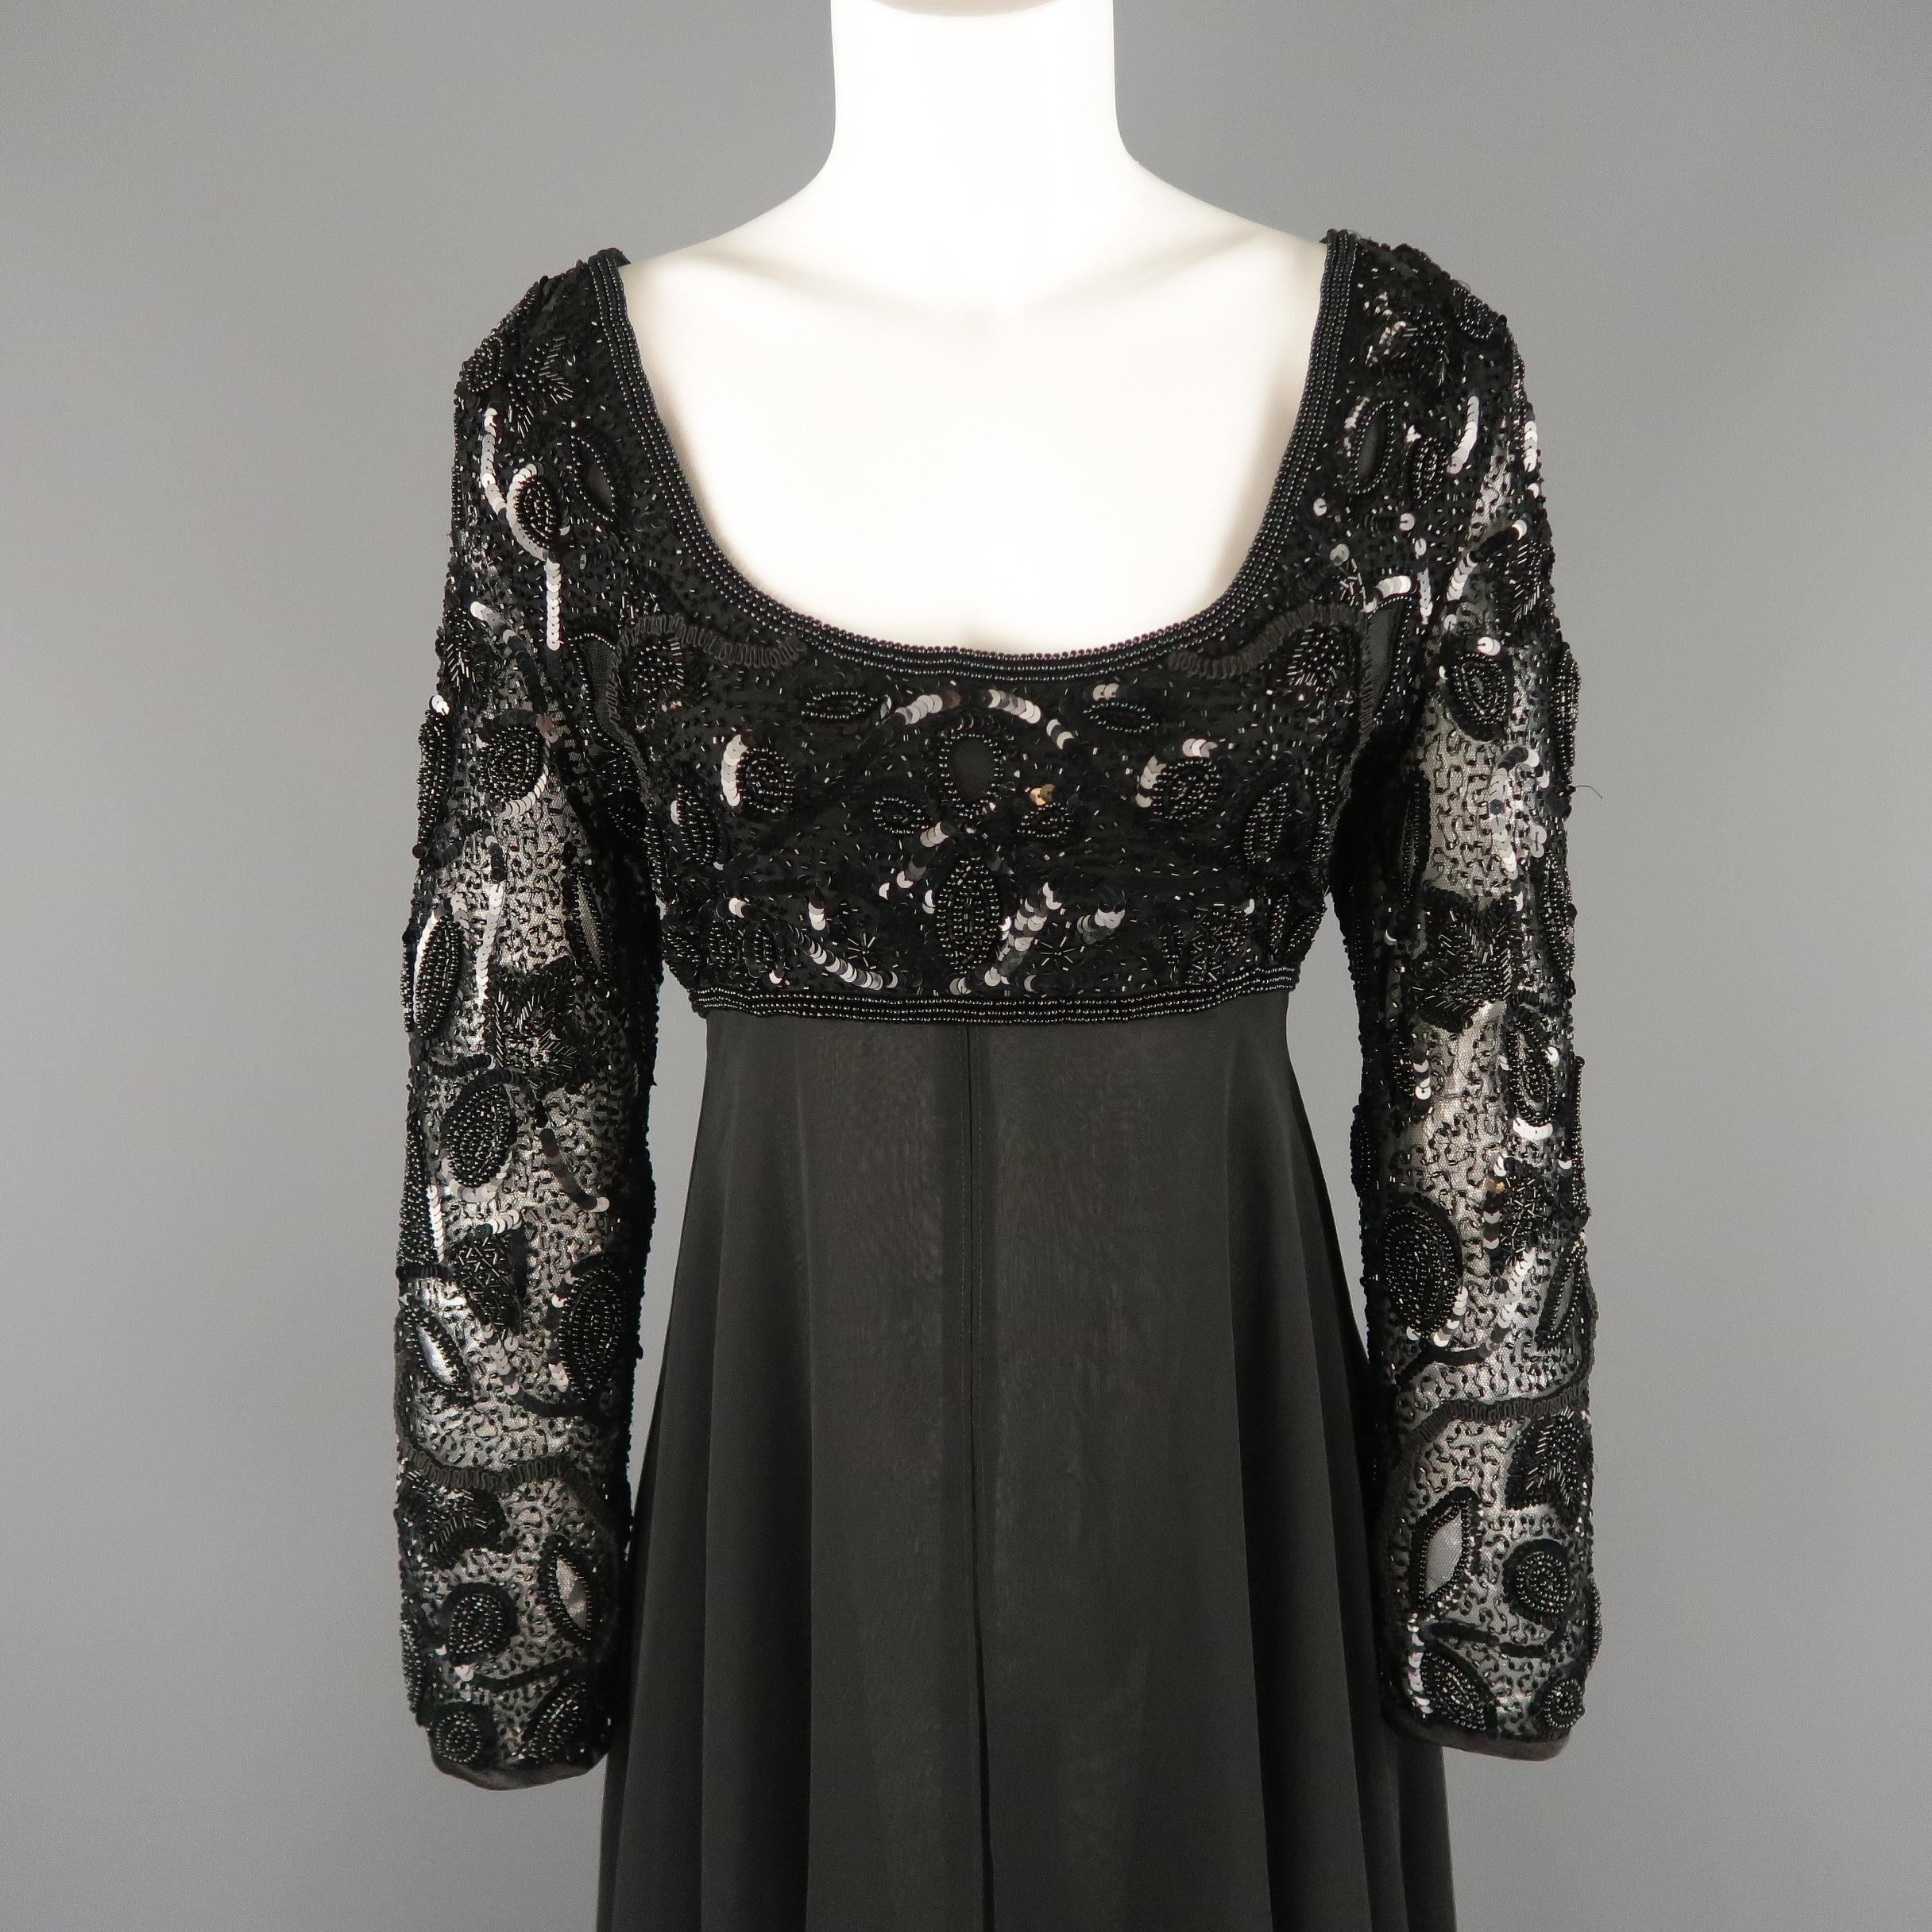 Vintage LOUIS FERAUD evening dress features a black sequin beaded scoop neck top with cropped long sleeves and layered chiffon empire waist, ruffled hem, A line maxi skirt. Made in Germany.
 
Very Good Pre-Owned Condition.
Marked: US 12
